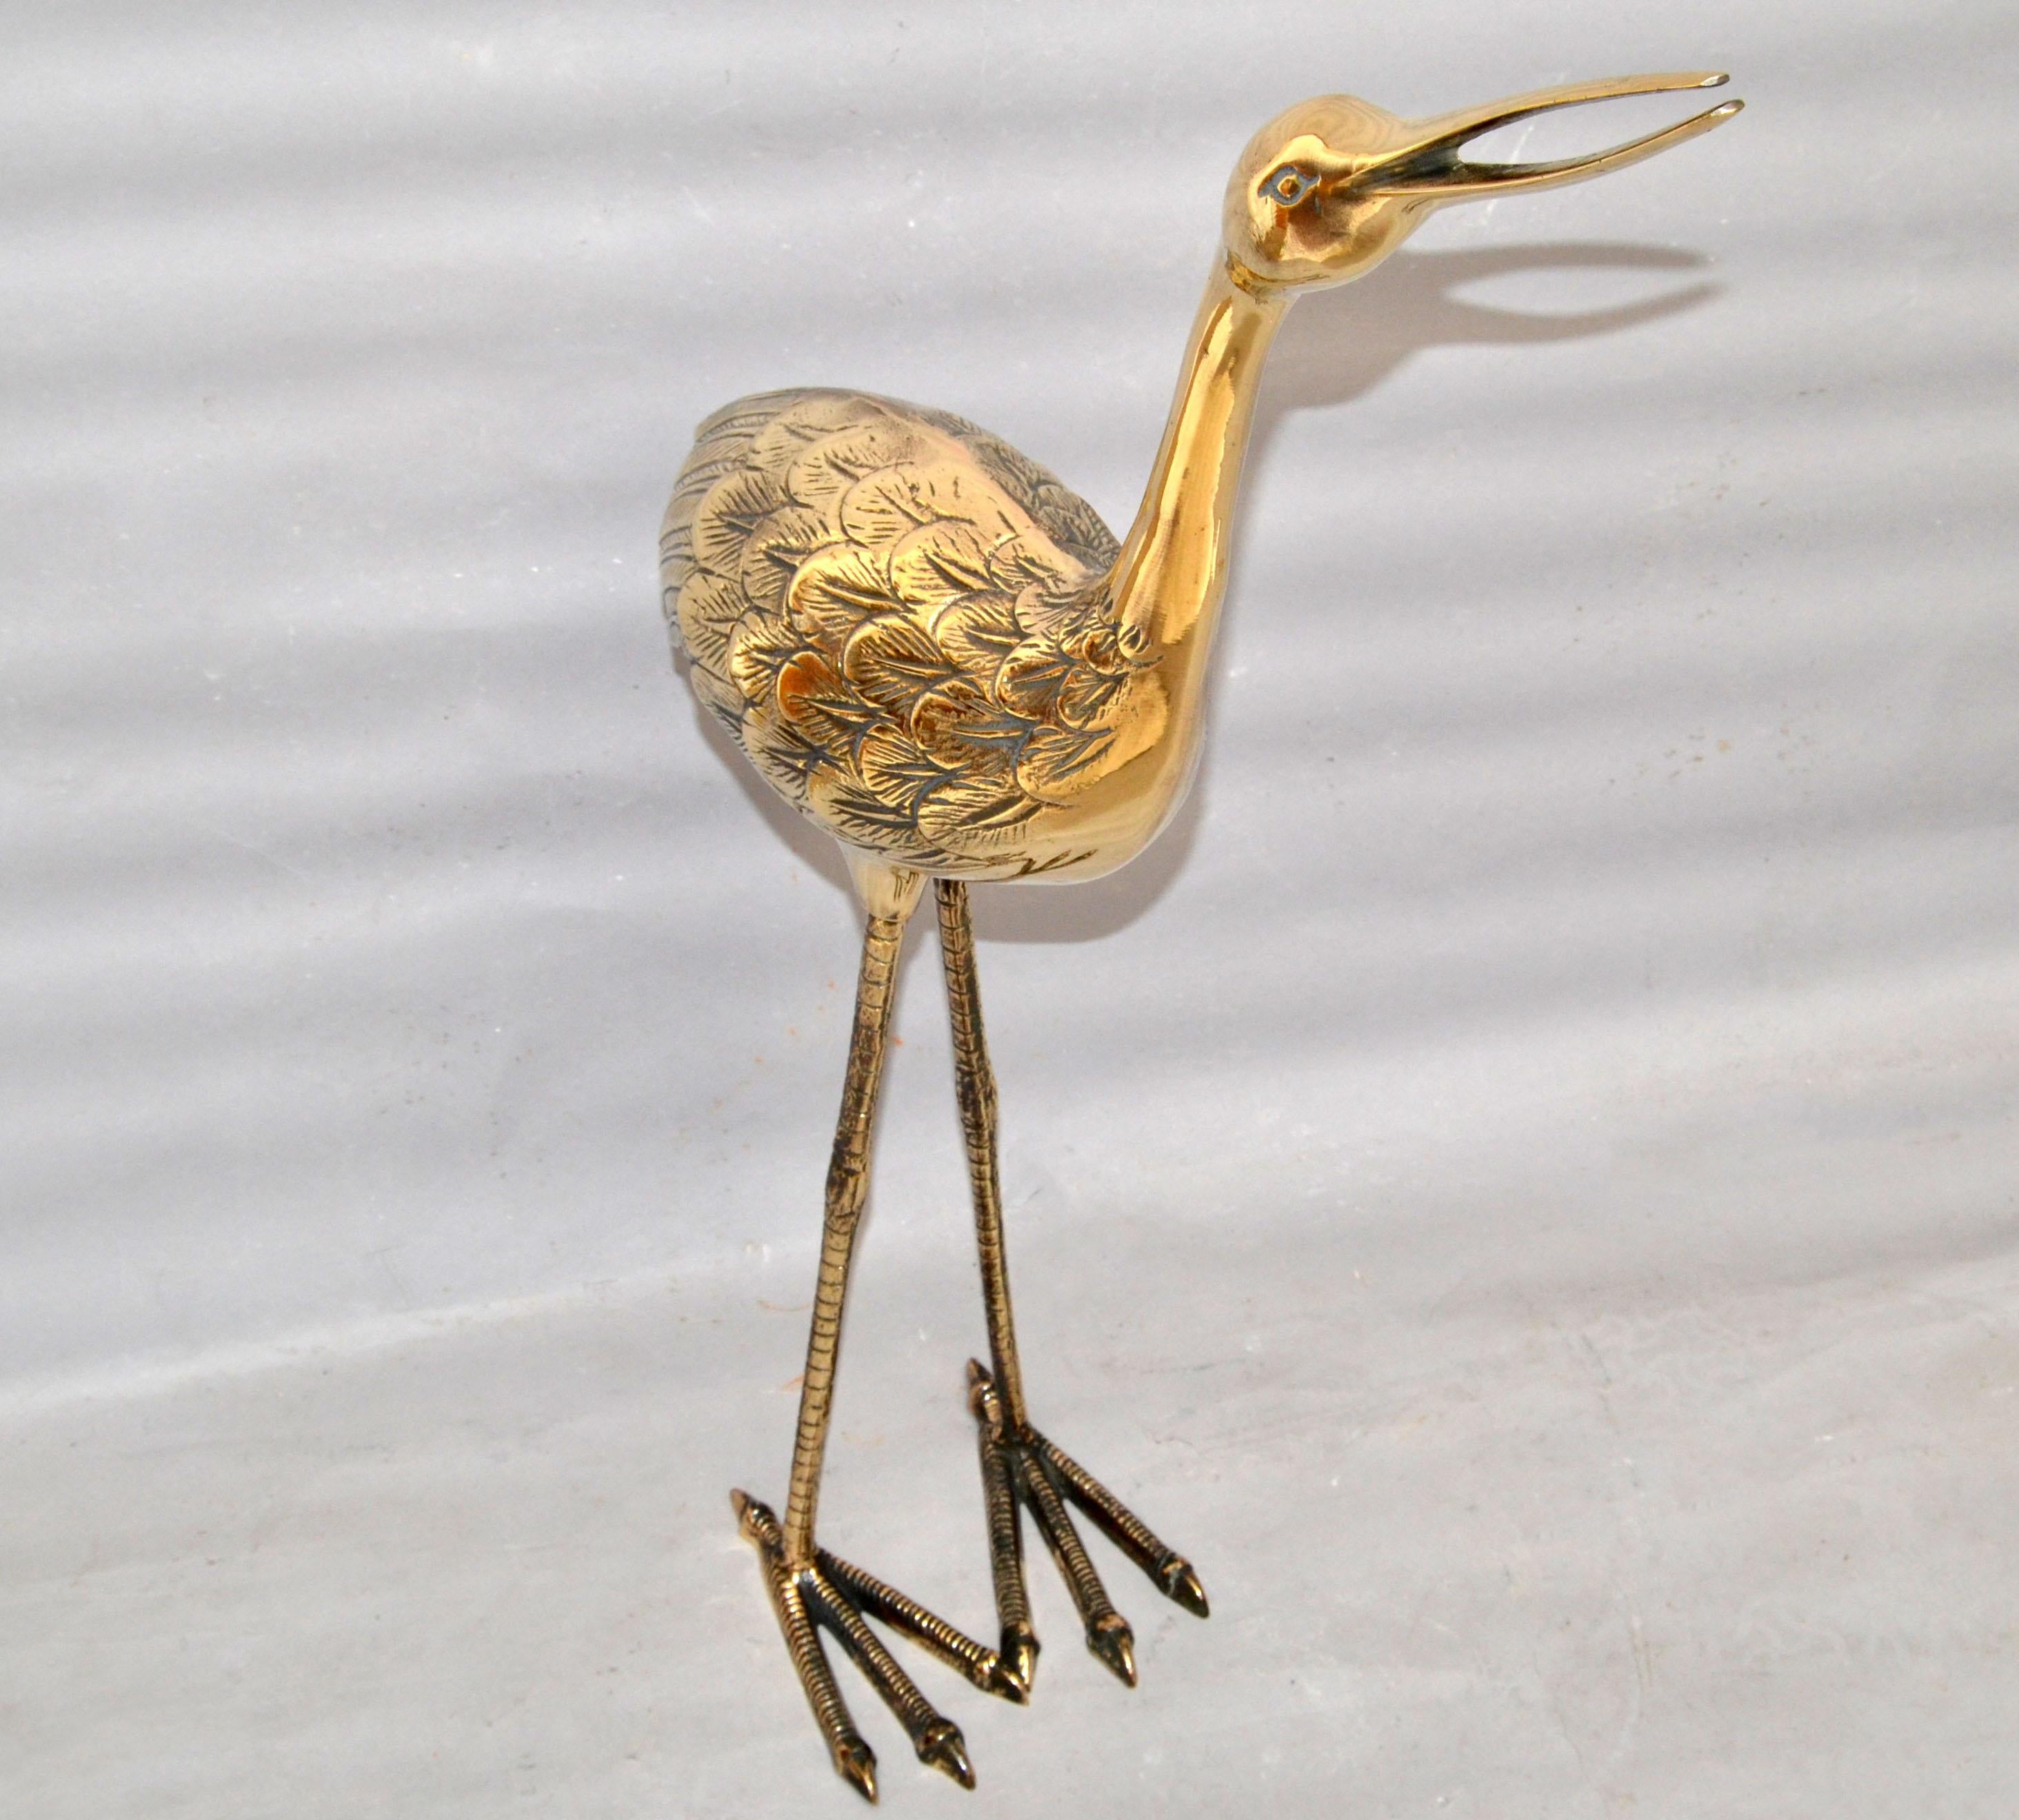 Bronze Crane Life-Size Animal Sculpture Handcrafted Mid-Century Modern, 1970 In Good Condition For Sale In Miami, FL